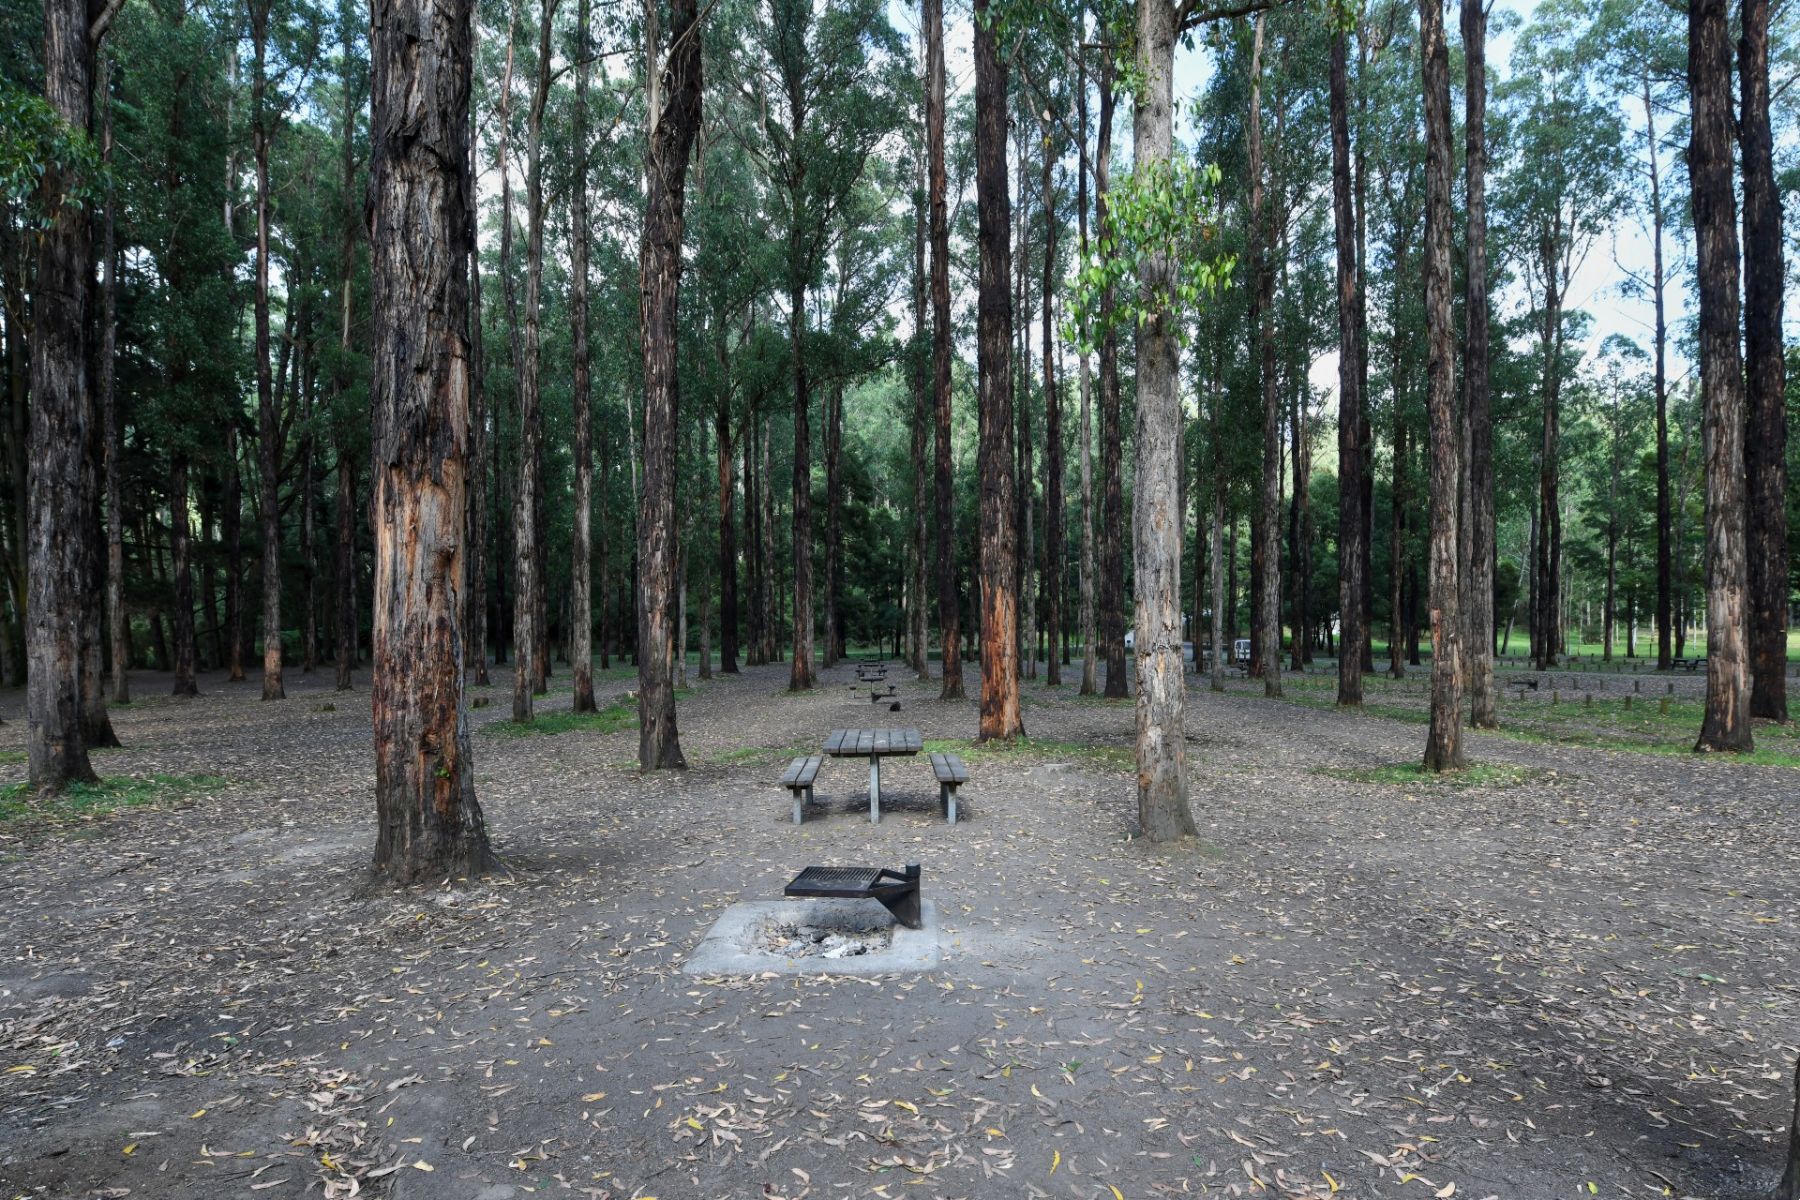 Picnic tables and a firepit in a forest